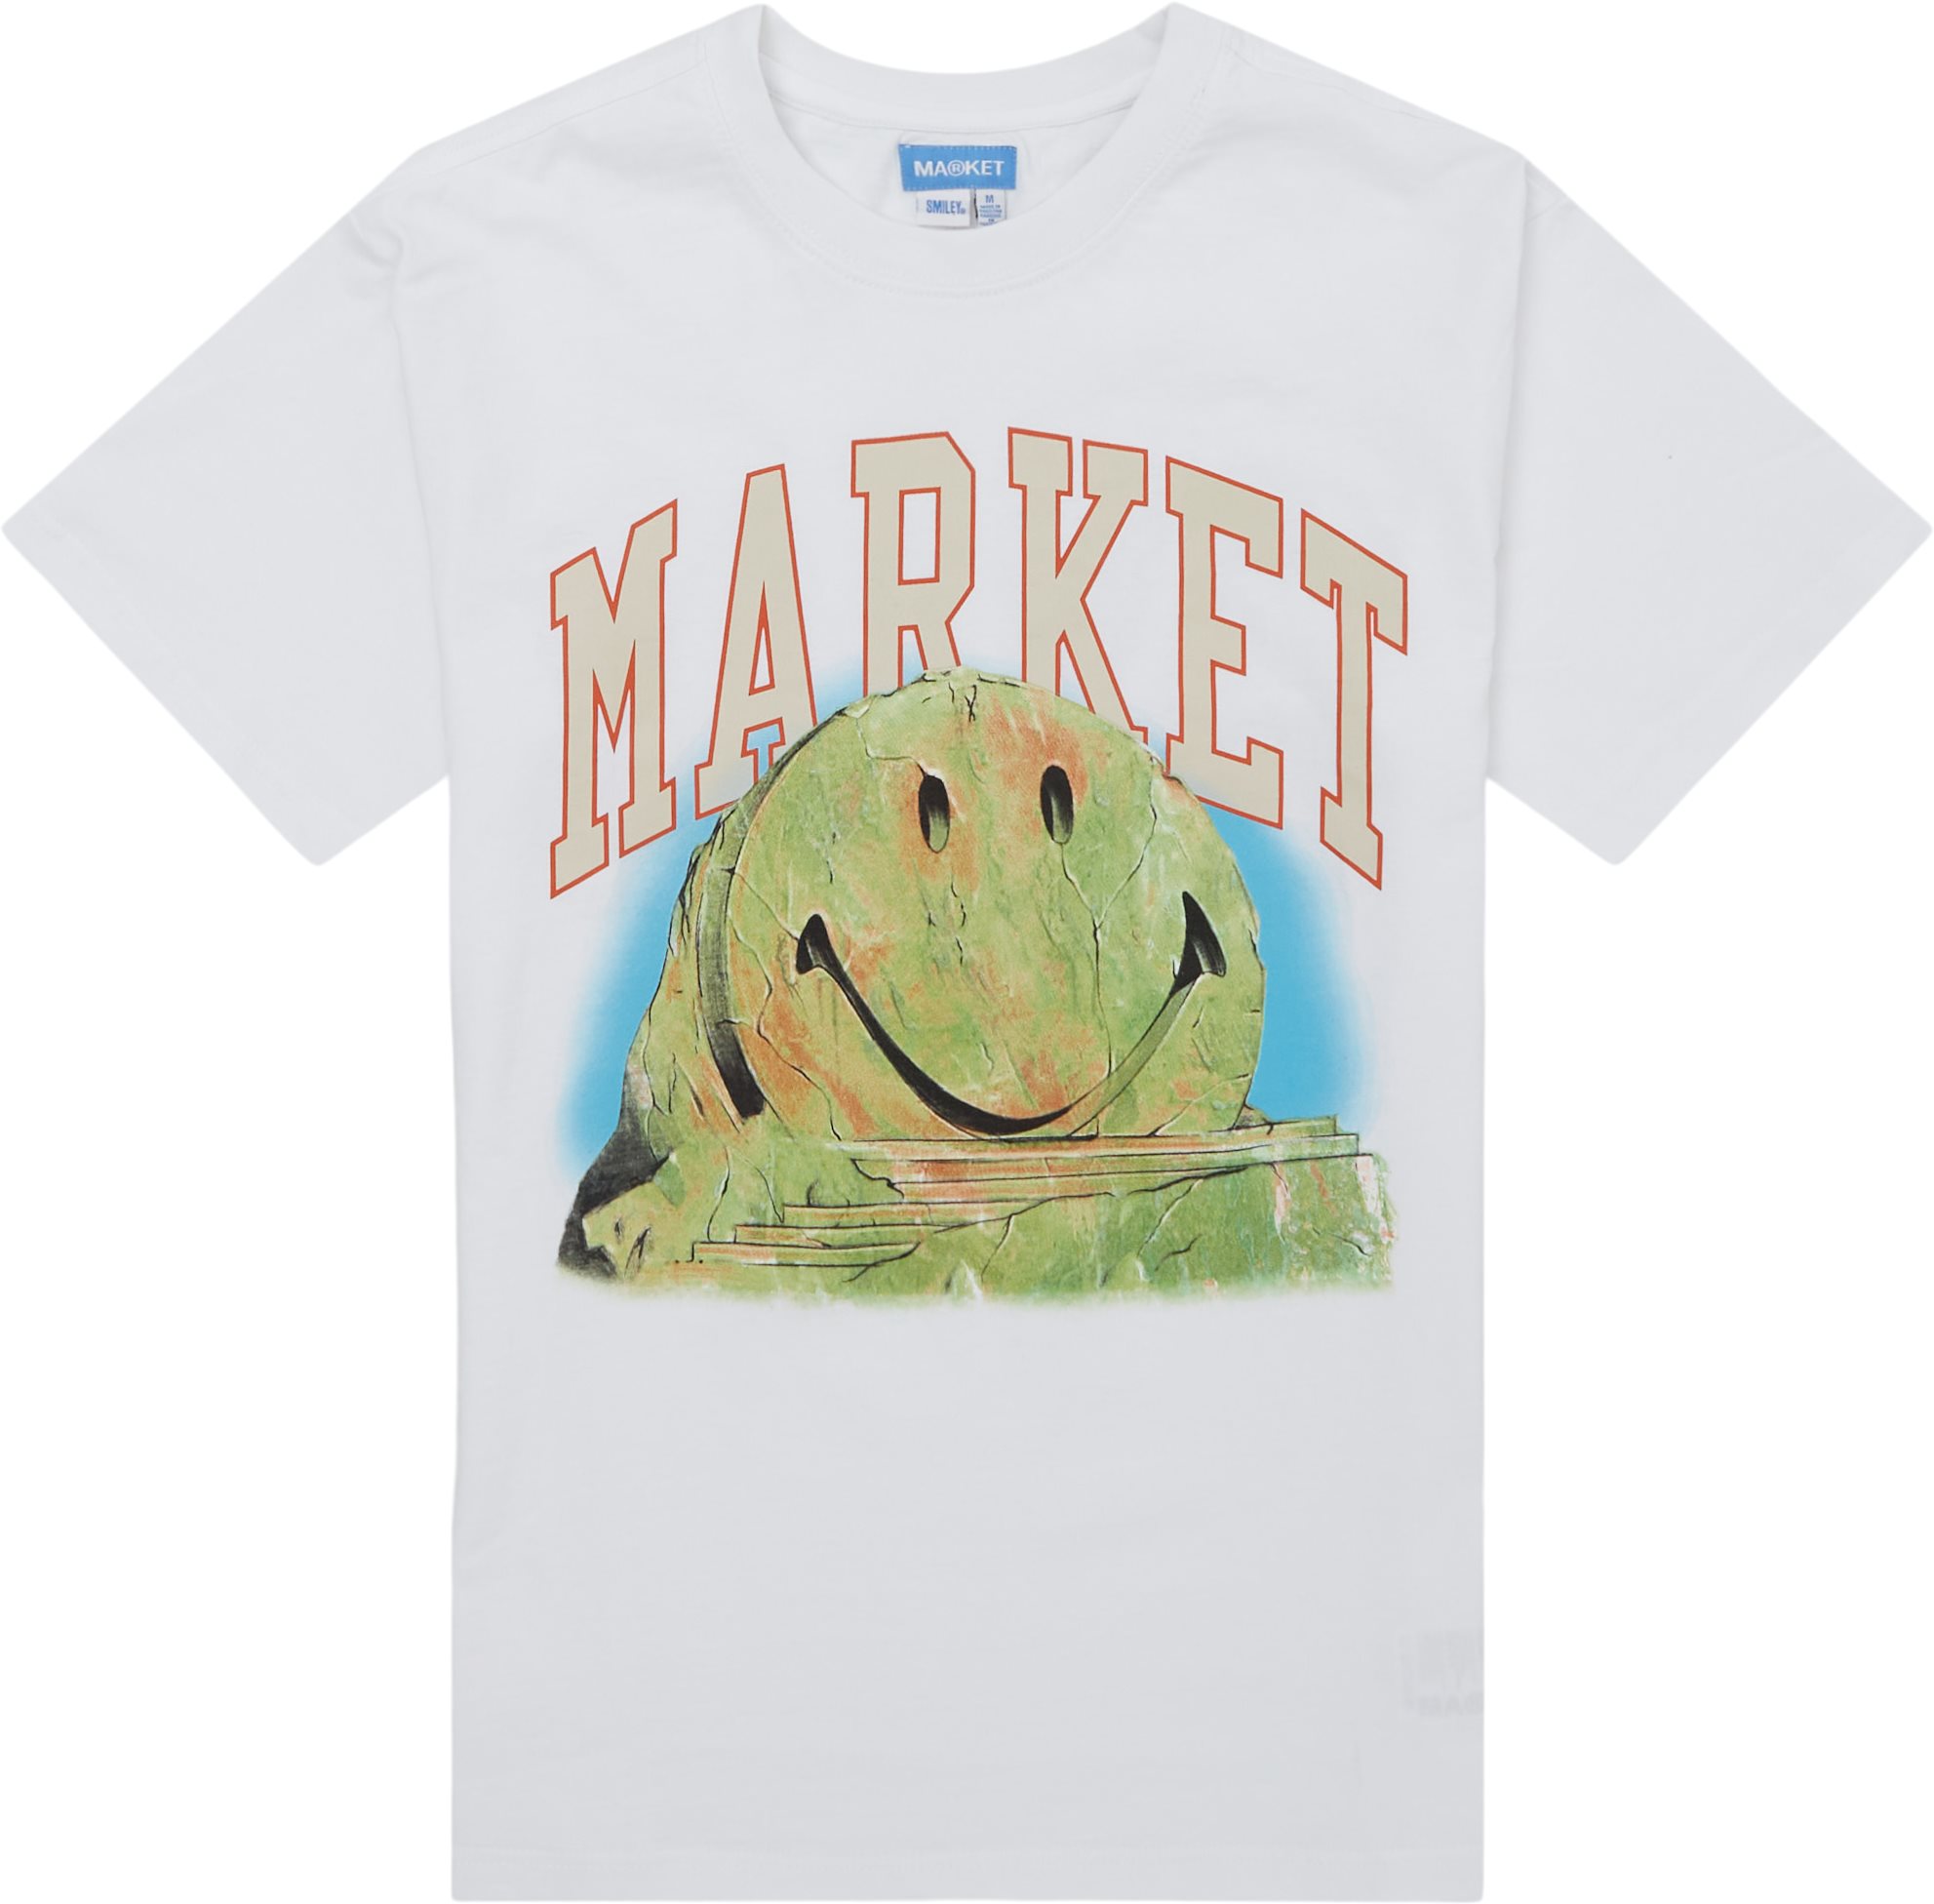 Market T-shirts SMILEY OUT OF BODY Vit